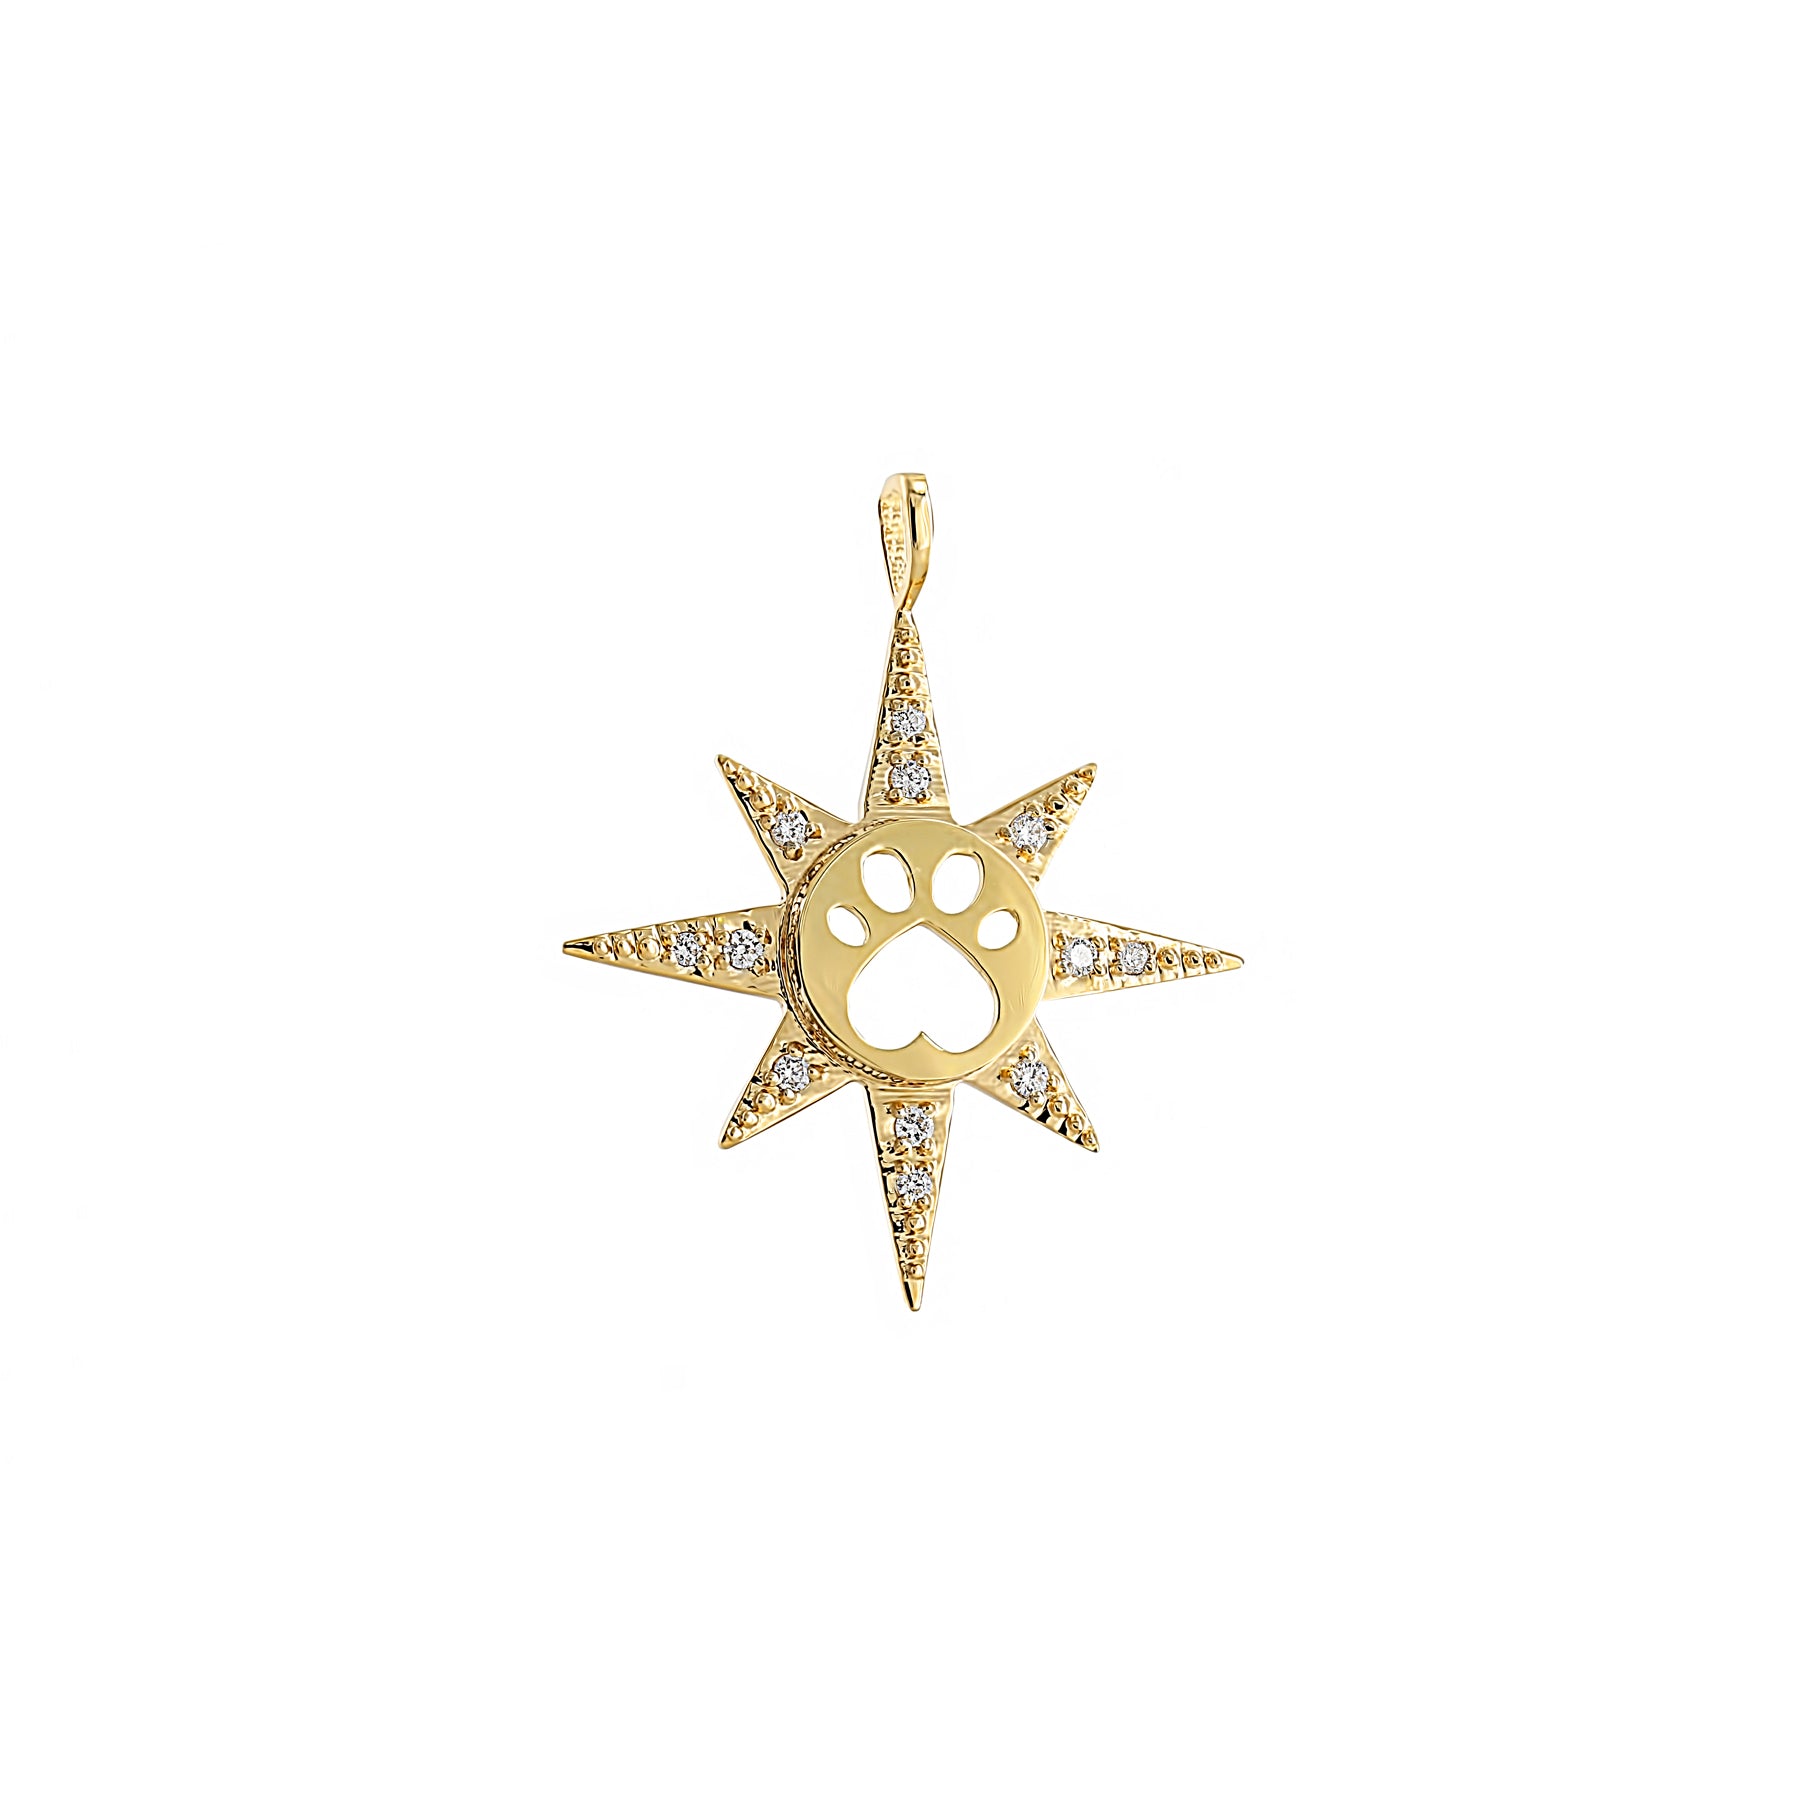 Our Cause for Paws 14k Yellow Gold Diamond Star Charm